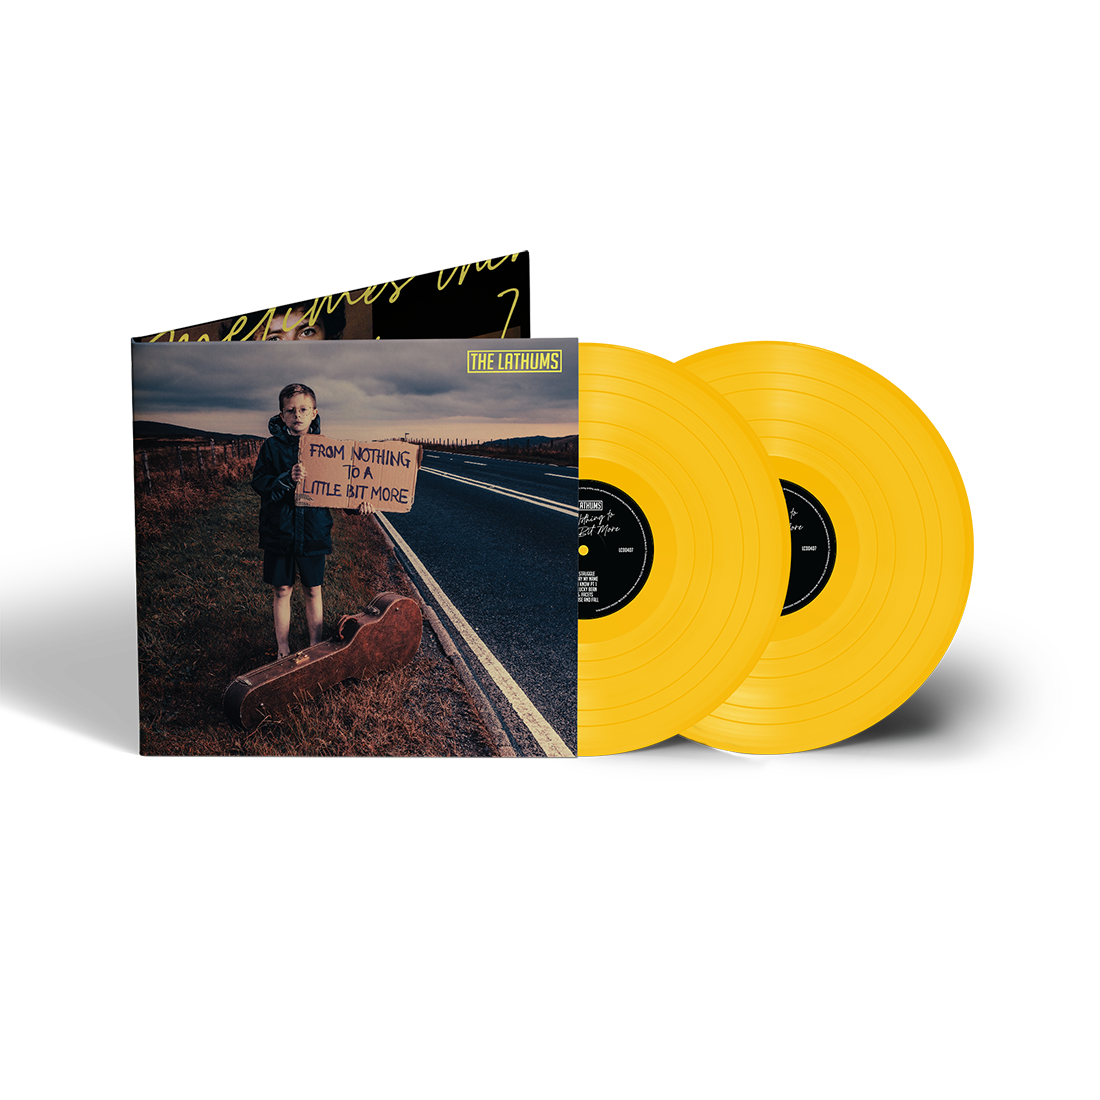 The Lathums - From Nothing To A Little Bit More: Limited Edition Deluxe Yellow 2LP